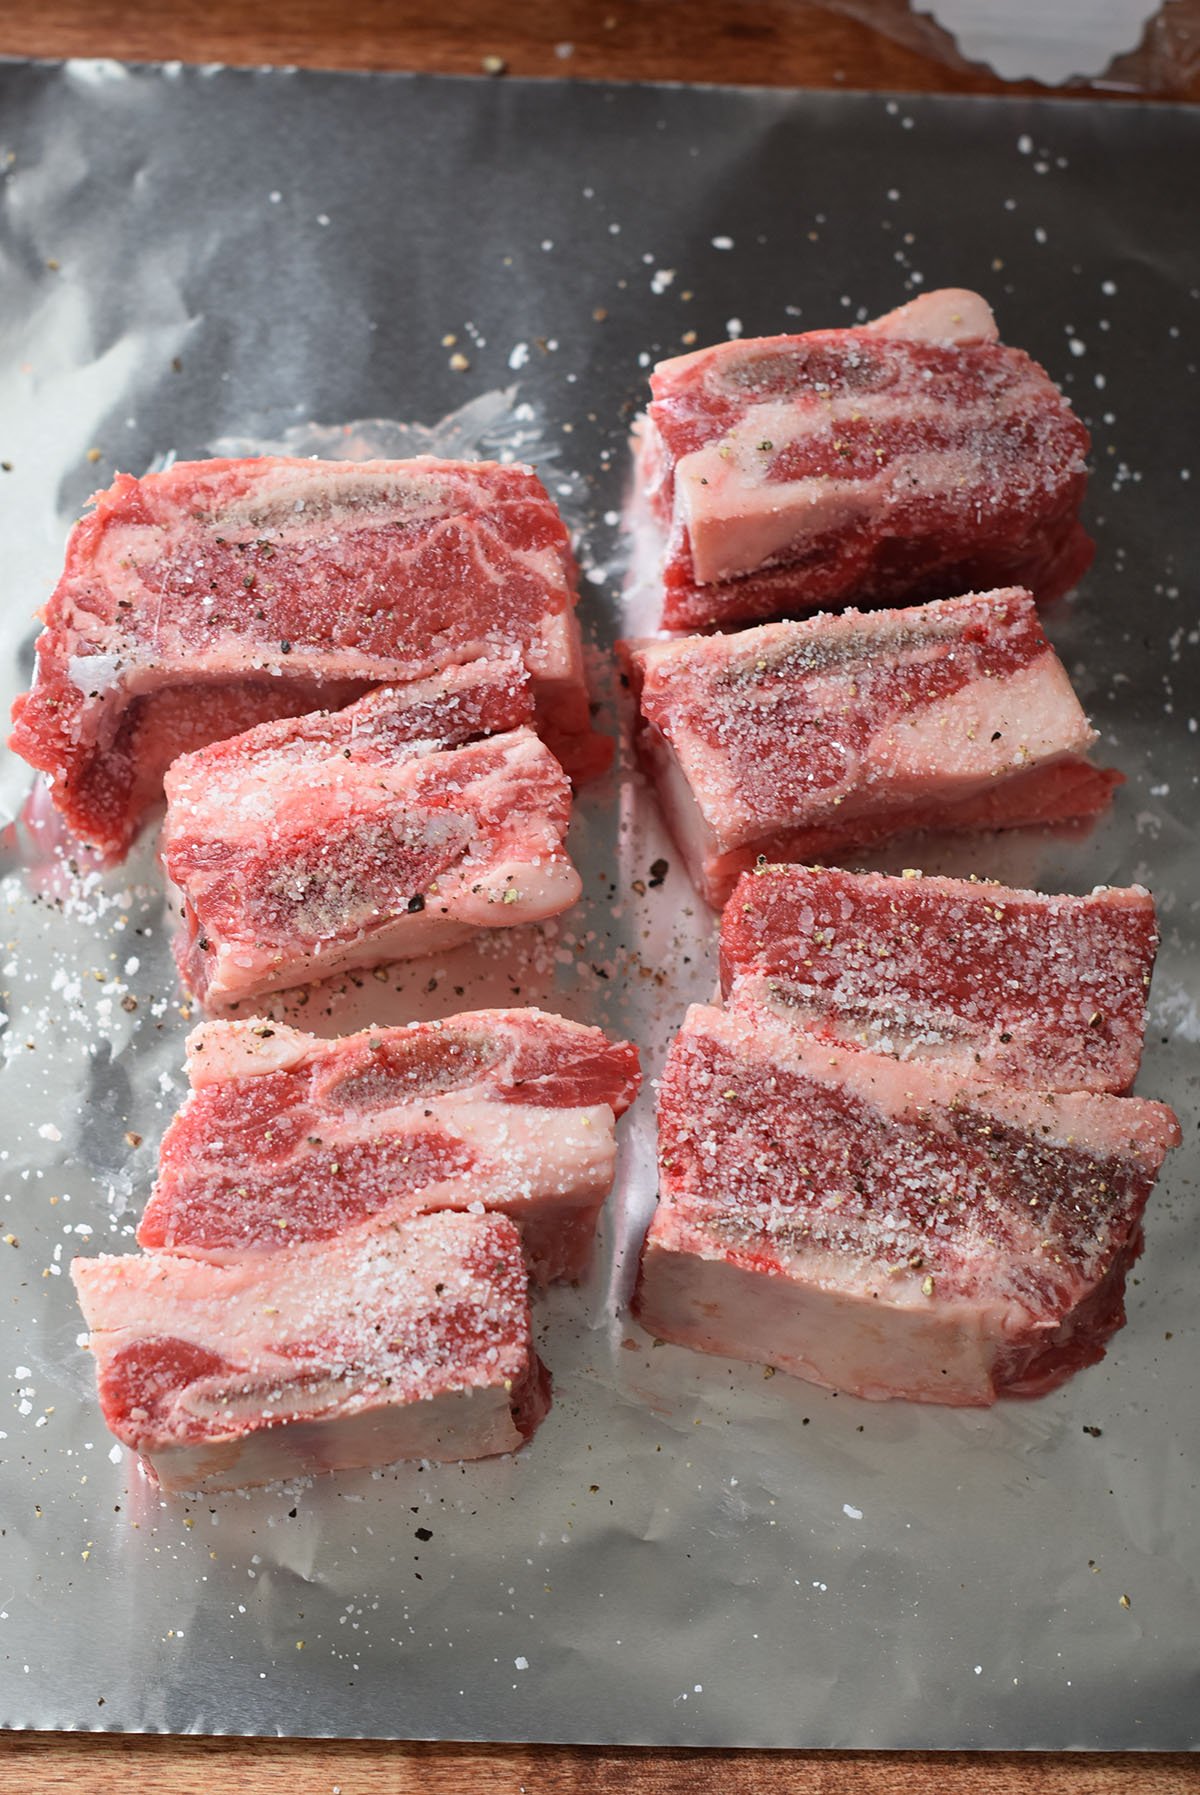 2 pounds of beef short ribs